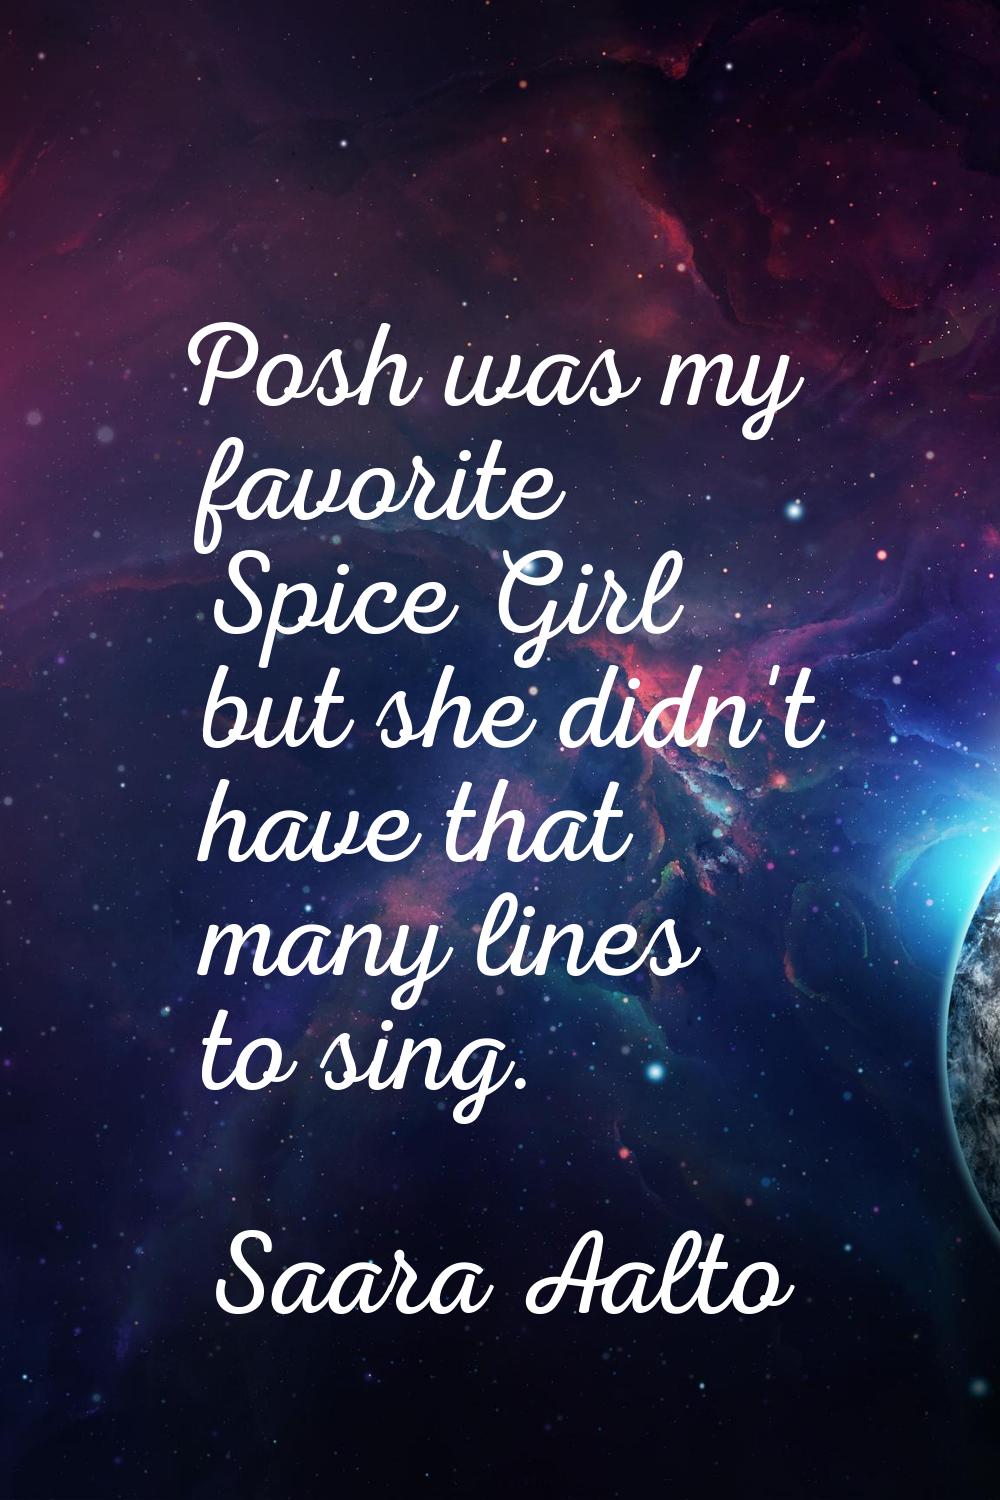 Posh was my favorite Spice Girl but she didn't have that many lines to sing.